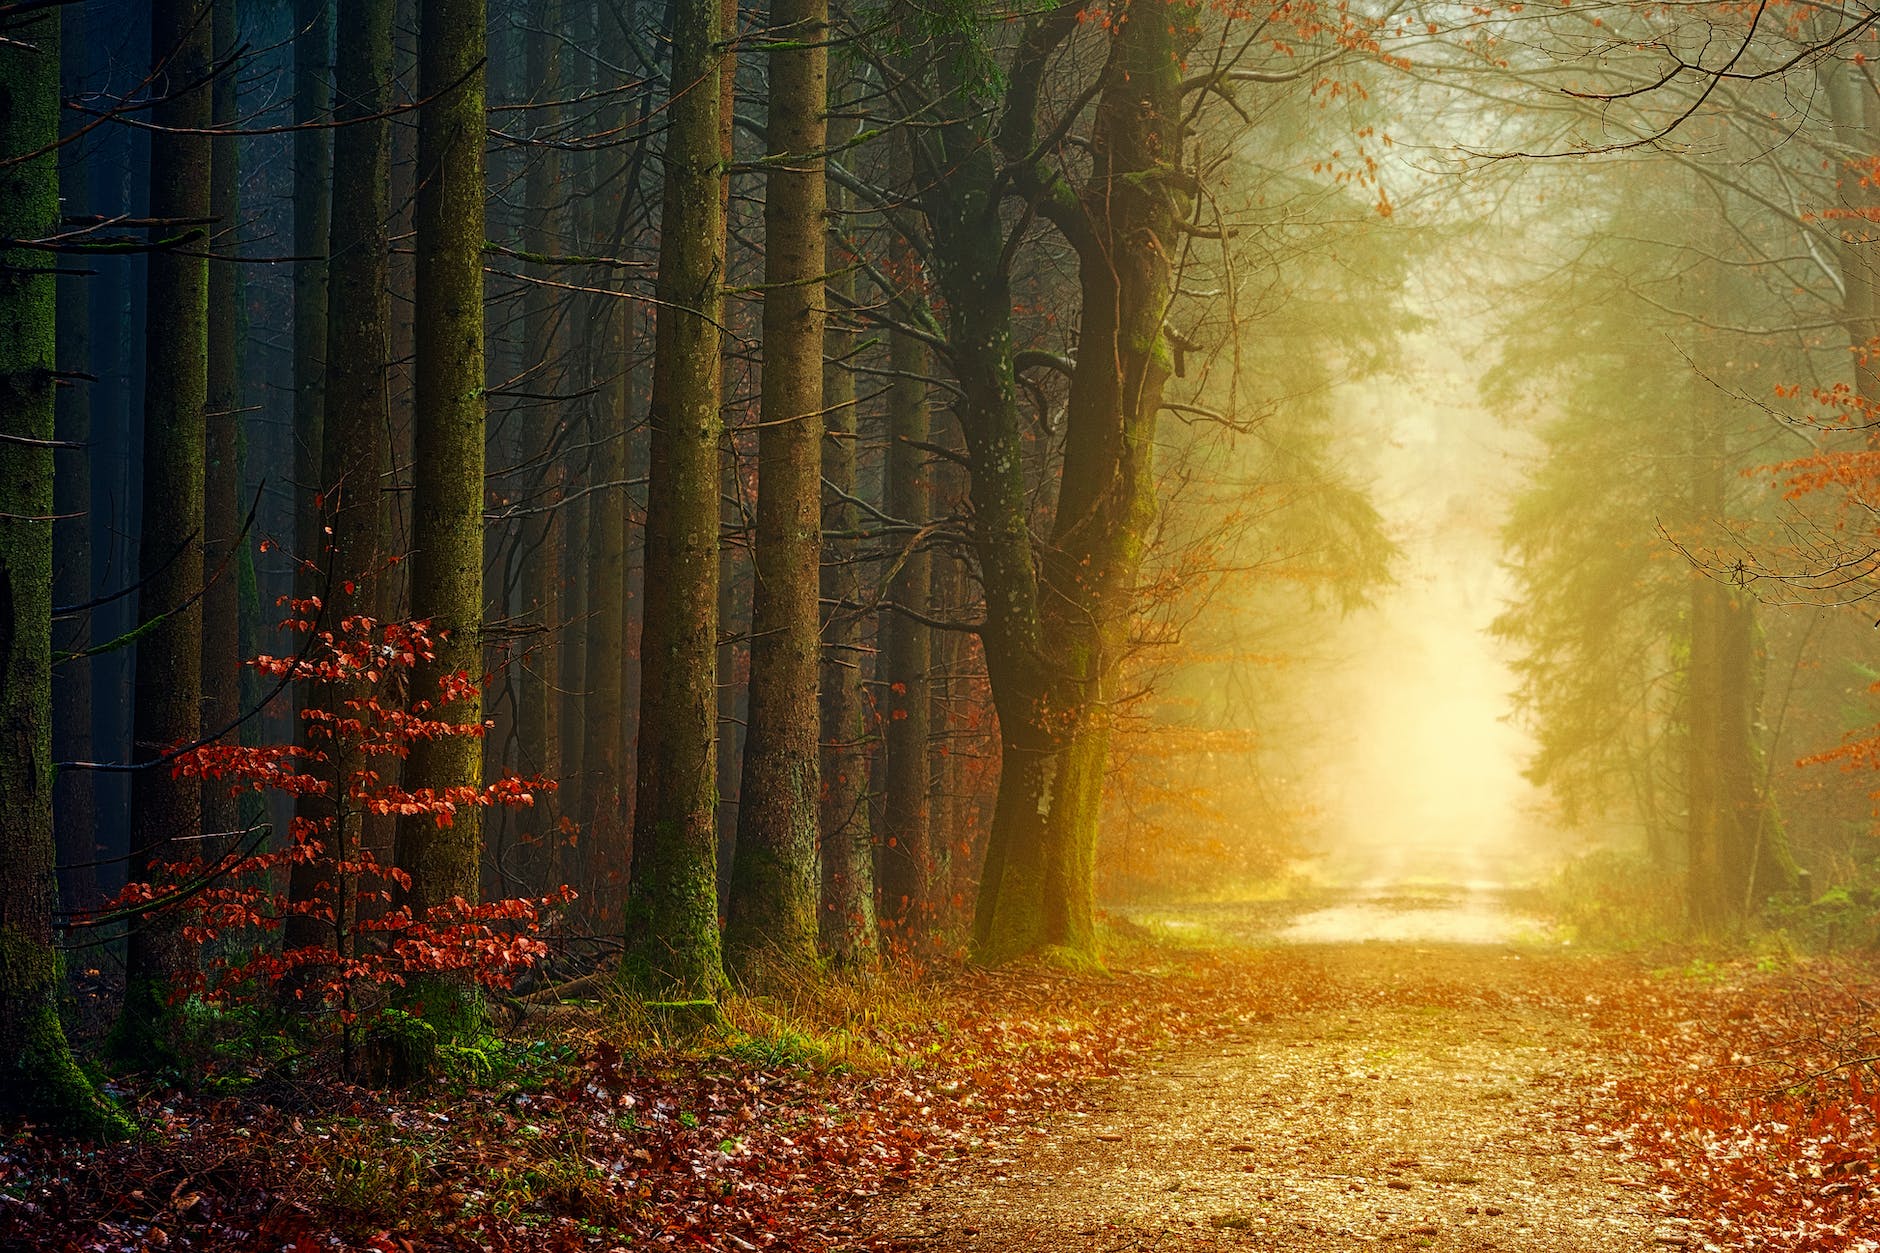 magic path in forest illuminated by colorful sunlight at dawn